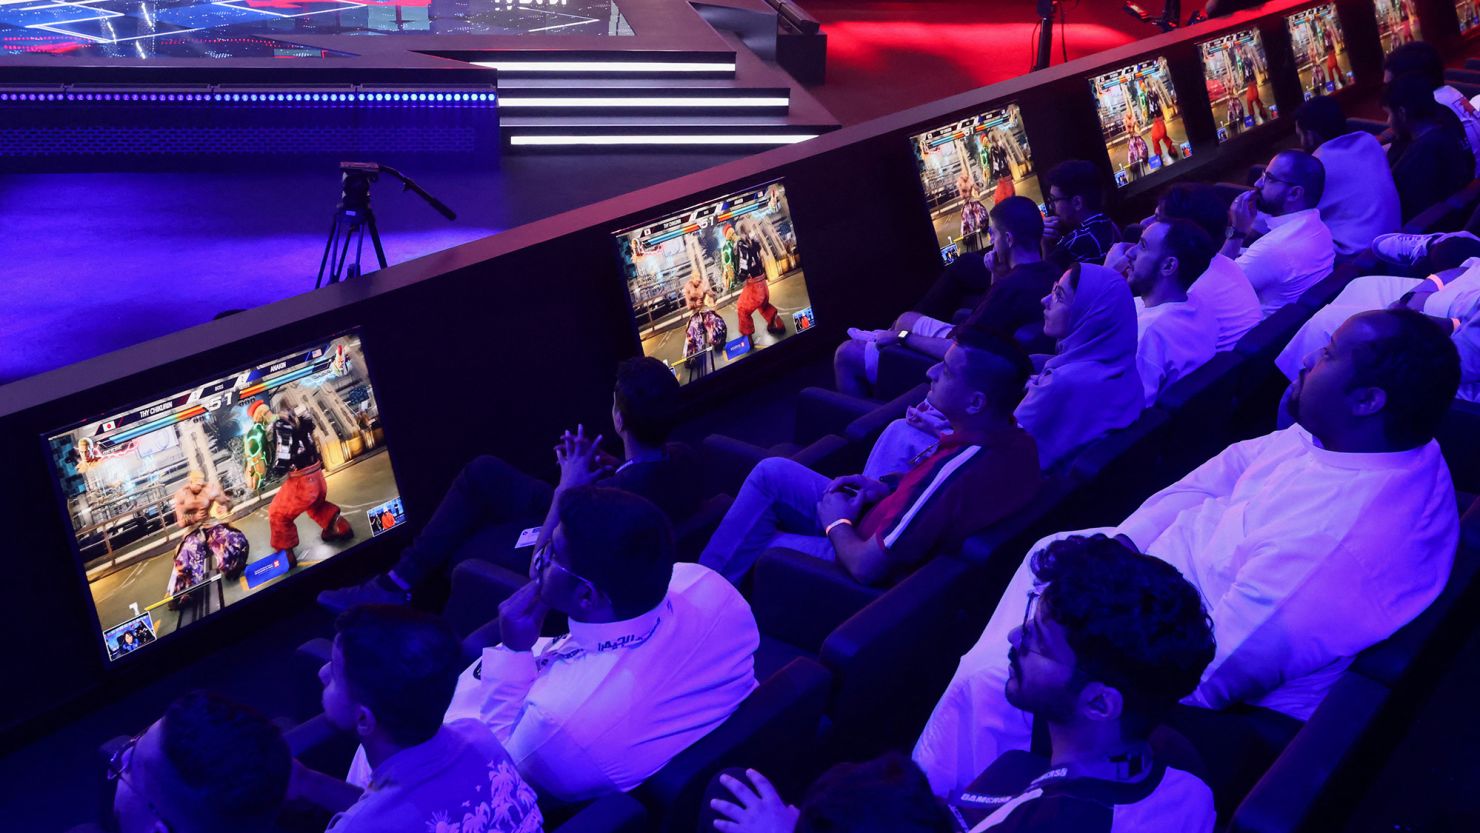 Spectators watch action at the Gamers8 festival in Saudi Arabia last year.